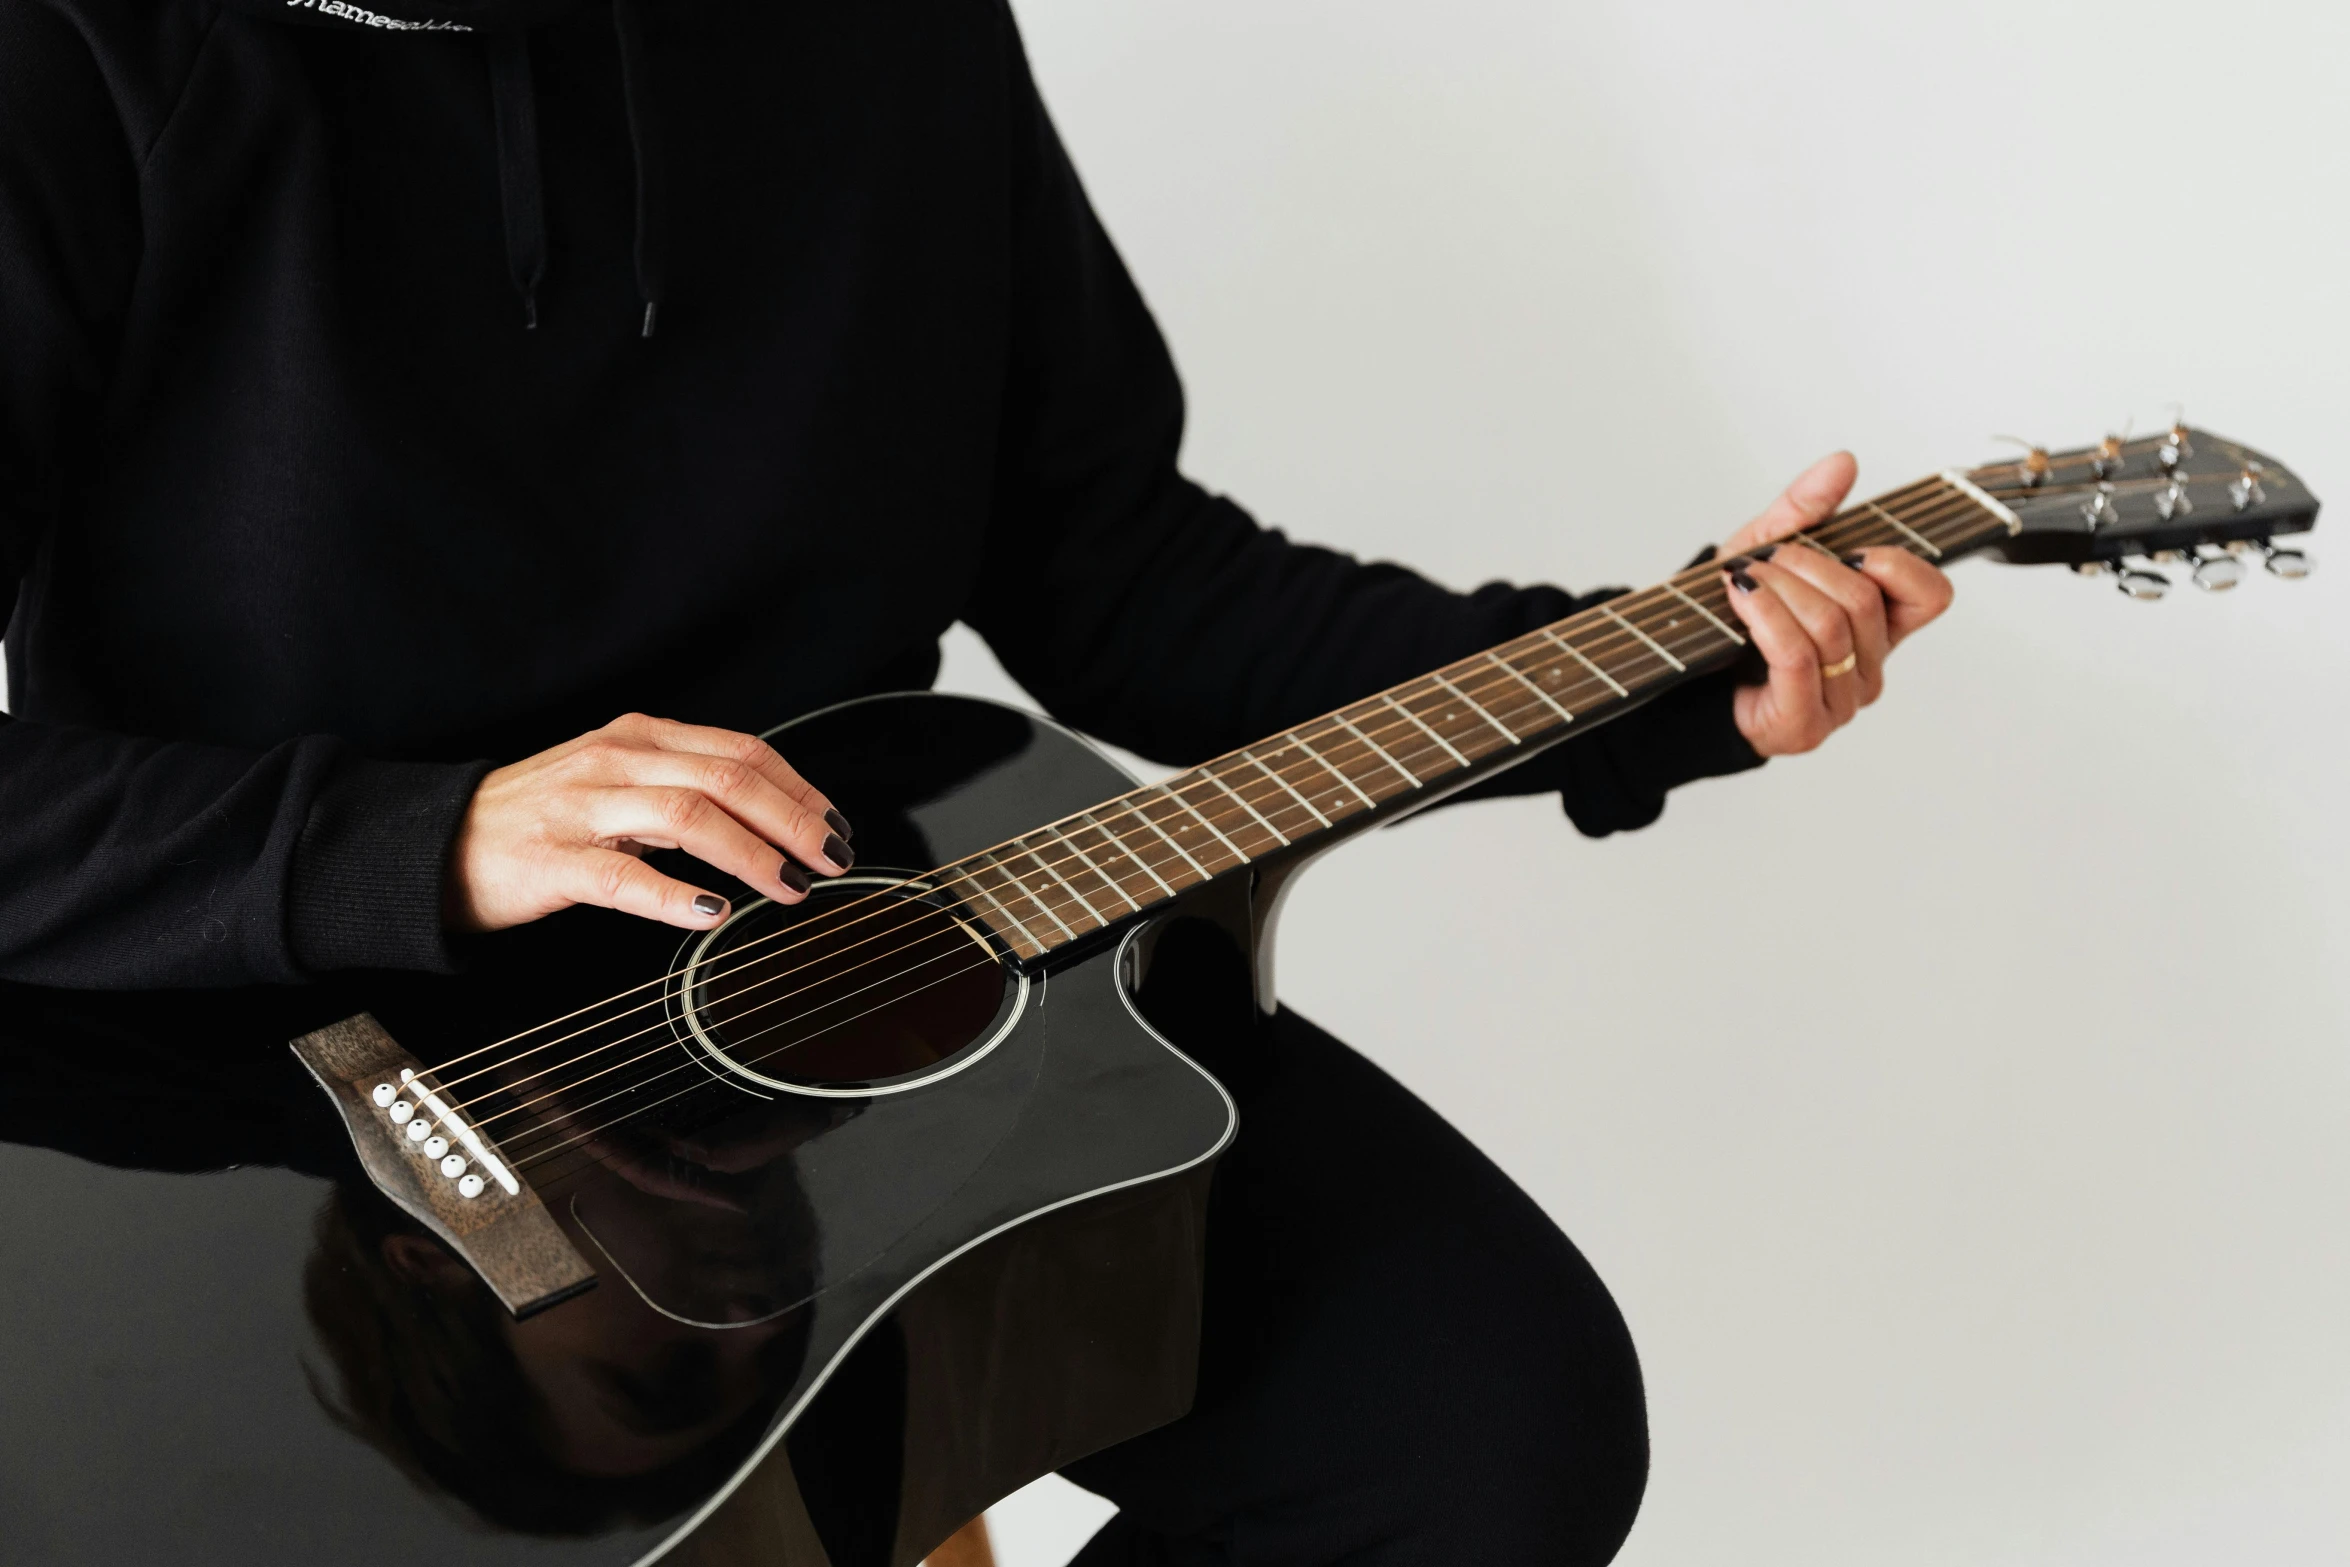 a man is playing an acoustic guitar in front of a white background